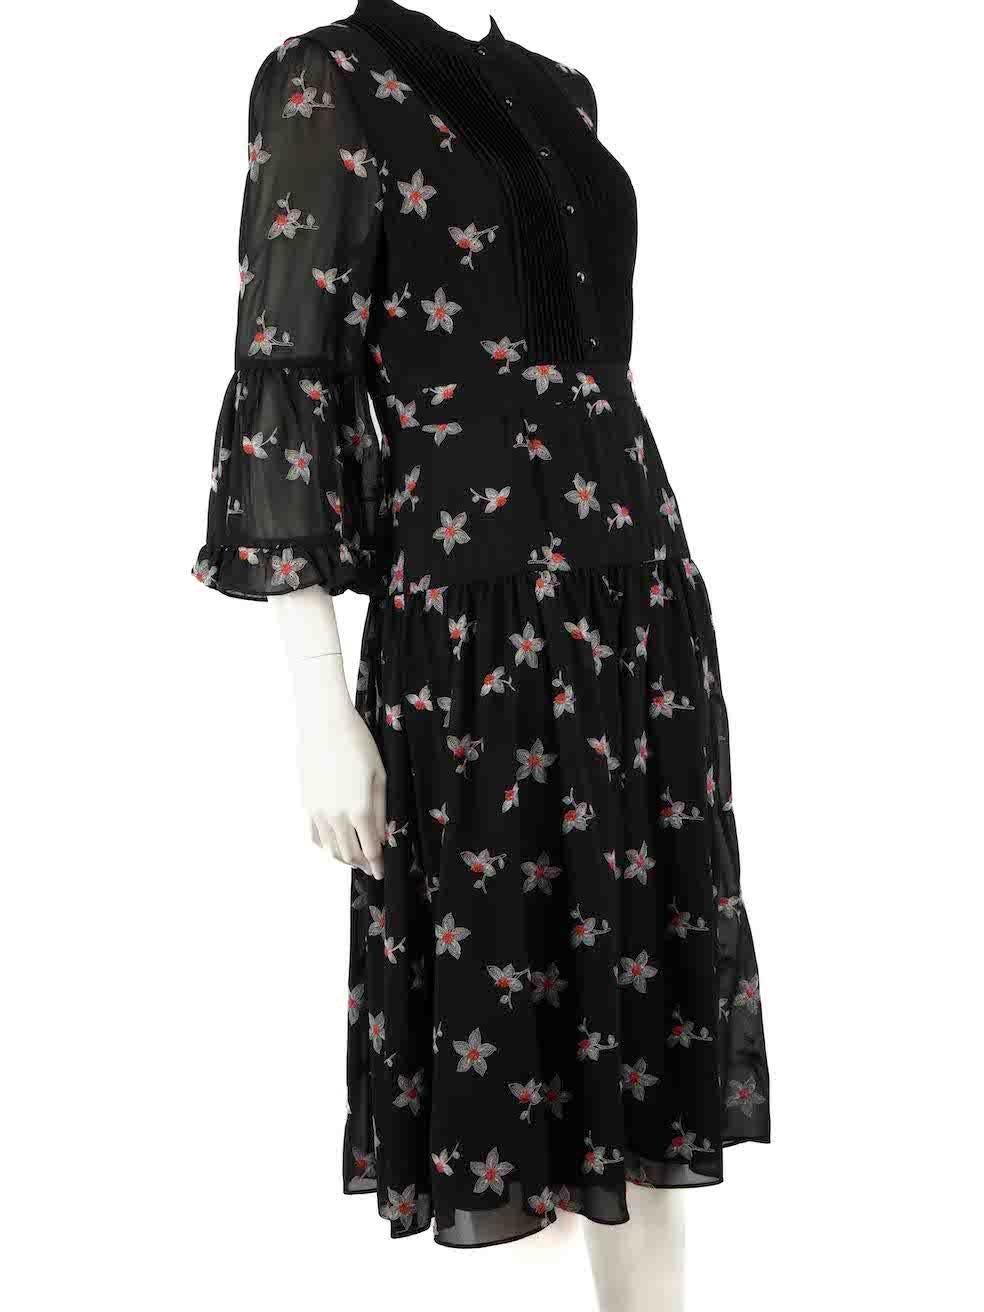 CONDITION is Very good. Hardly any visible wear to dress is evident on this used Somerset by Alice Temperley designer resale item.
 
 
 
 Details
 
 
 Black
 
 Polyester
 
 Dress
 
 Floral embroidered pattern
 
 Long sheer sleeves
 
 Front pin tuck